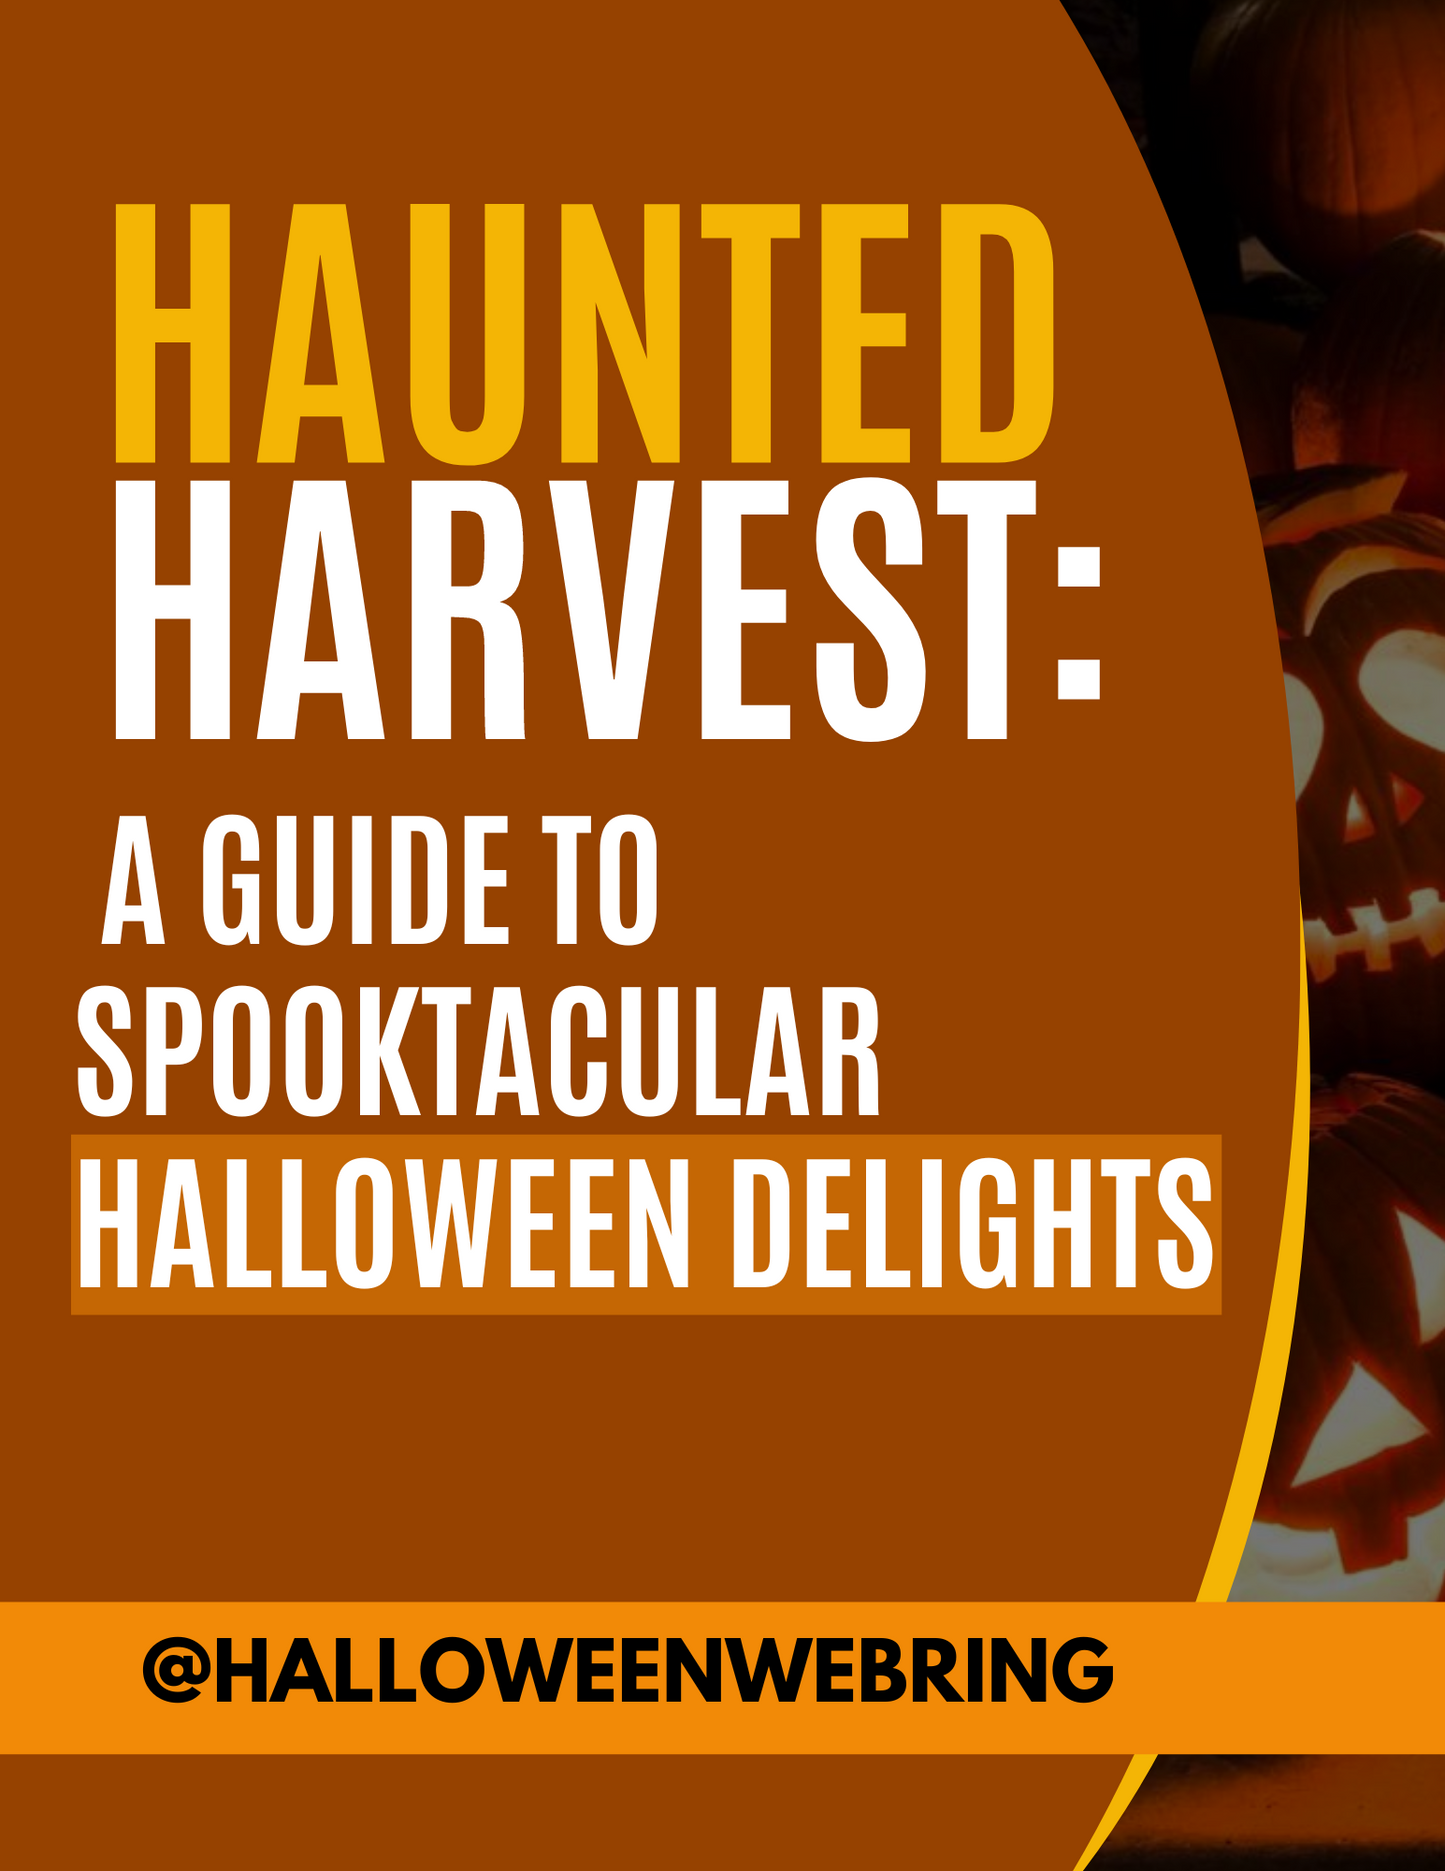 Haunted Harvest: A Guide to Spooktacular Halloween Delights